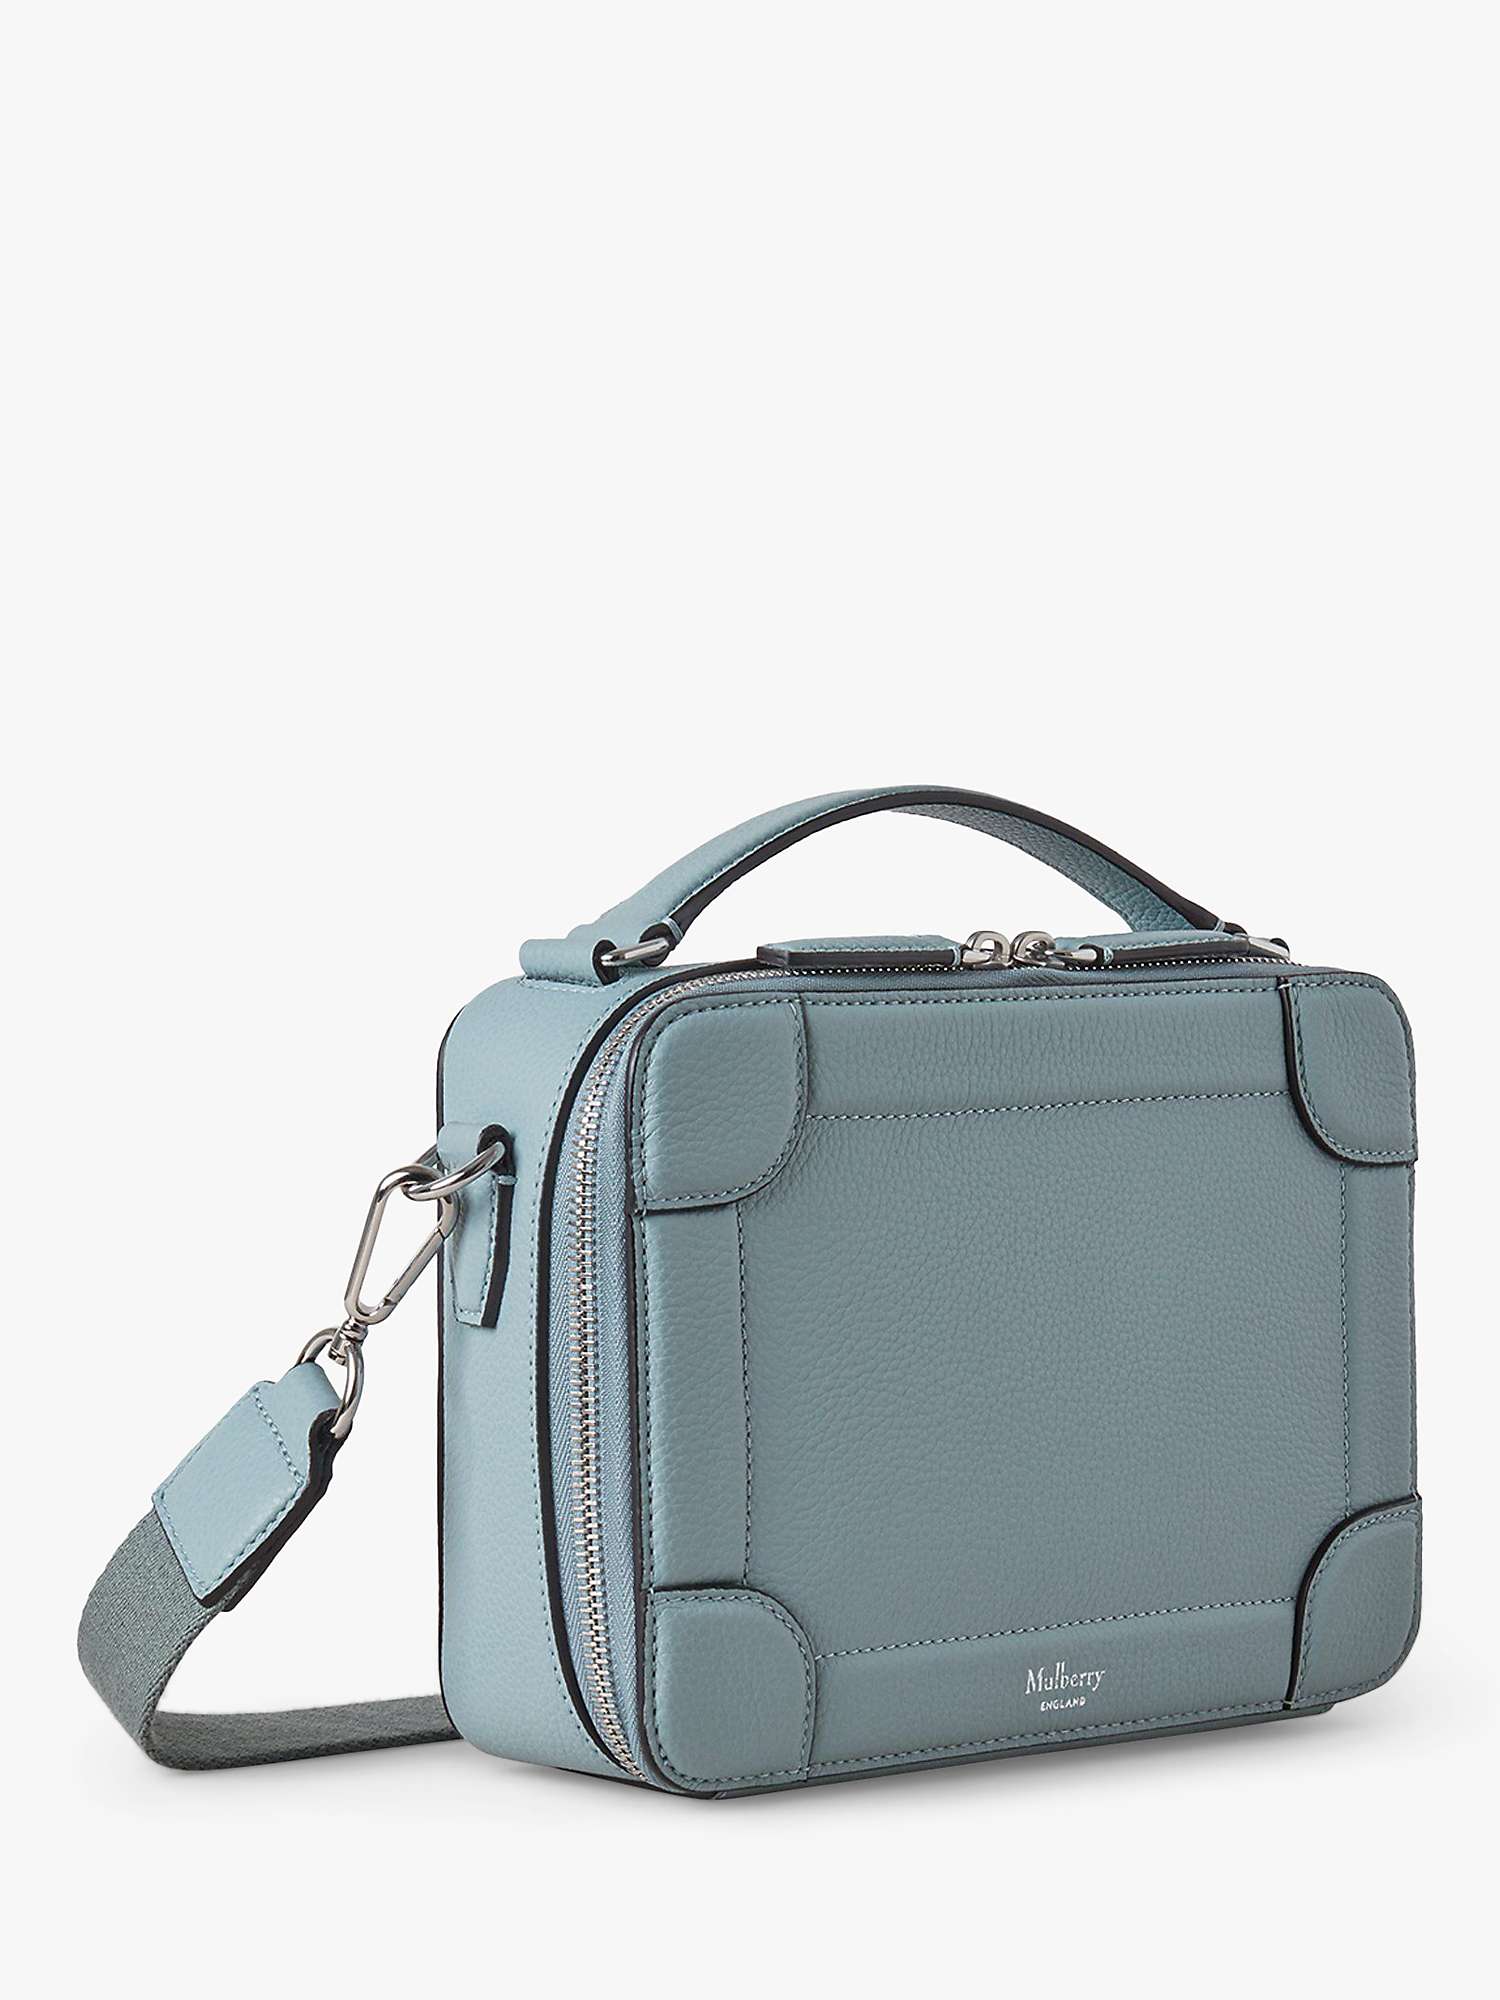 Buy Mulberry Belgrave Small Classic Grain Leather Cross Body Messenger Bag, Cloud Online at johnlewis.com